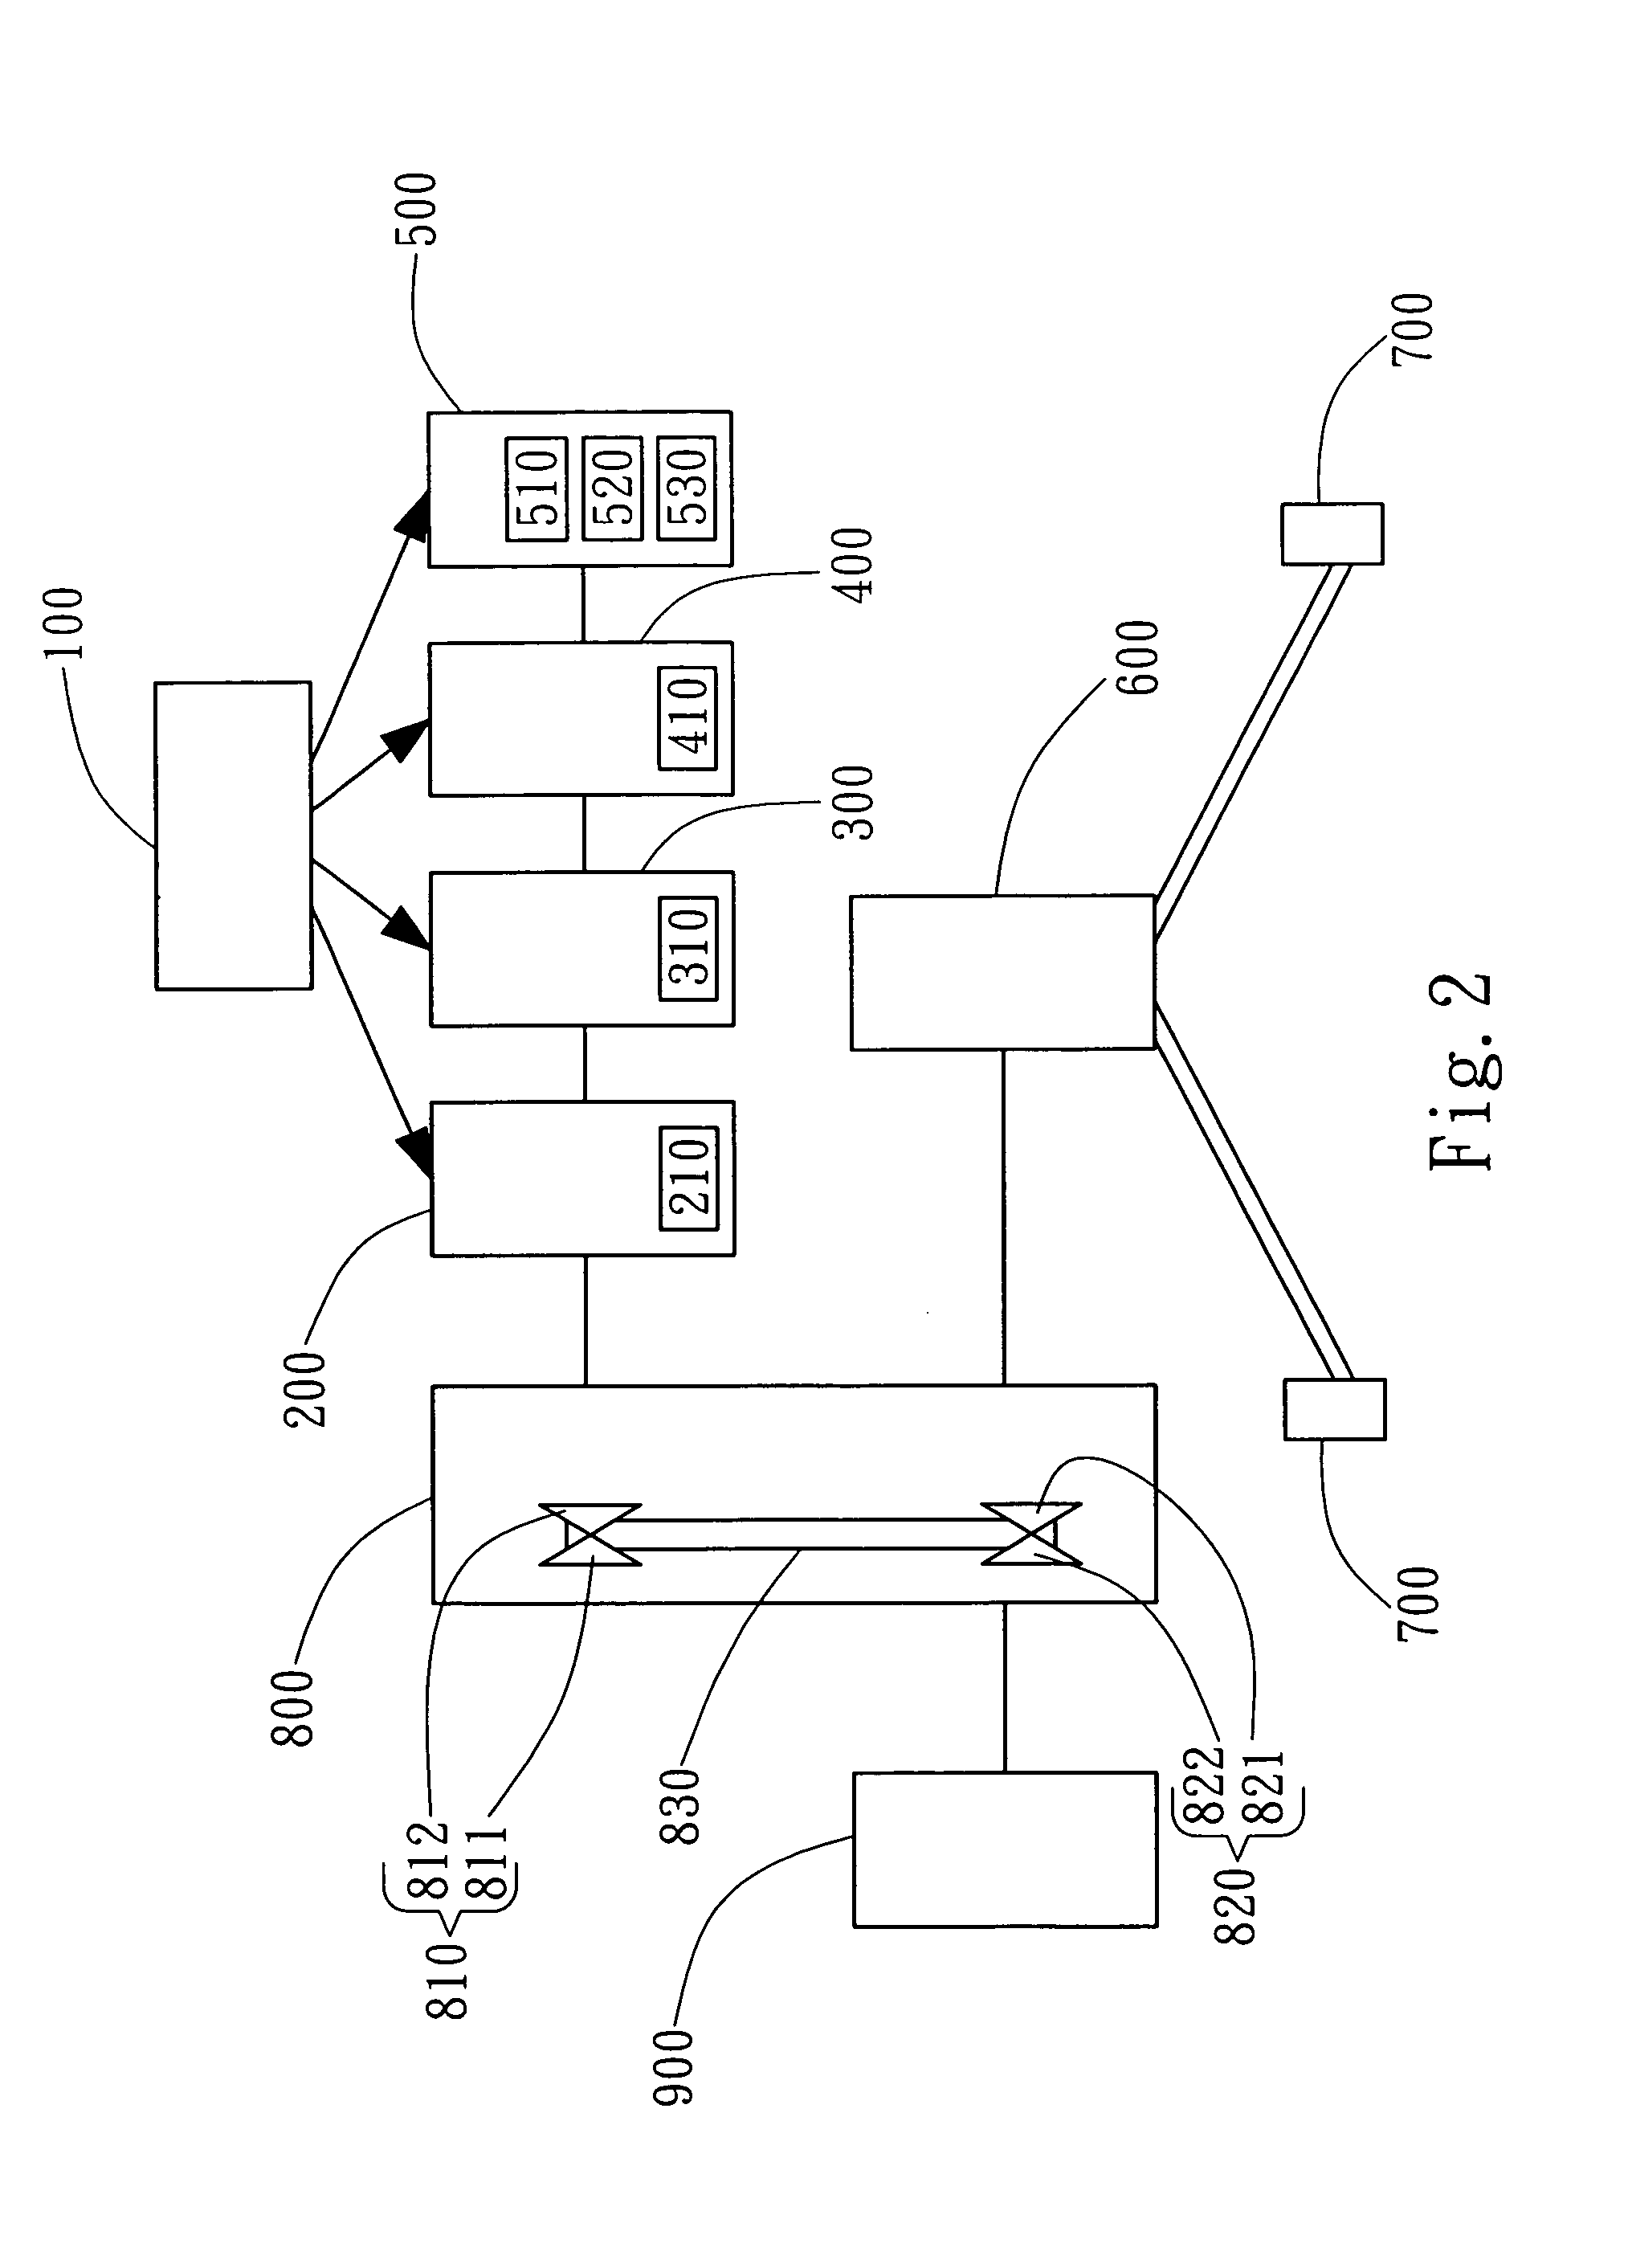 Hybrid system with a controllable function of variable speed transmission